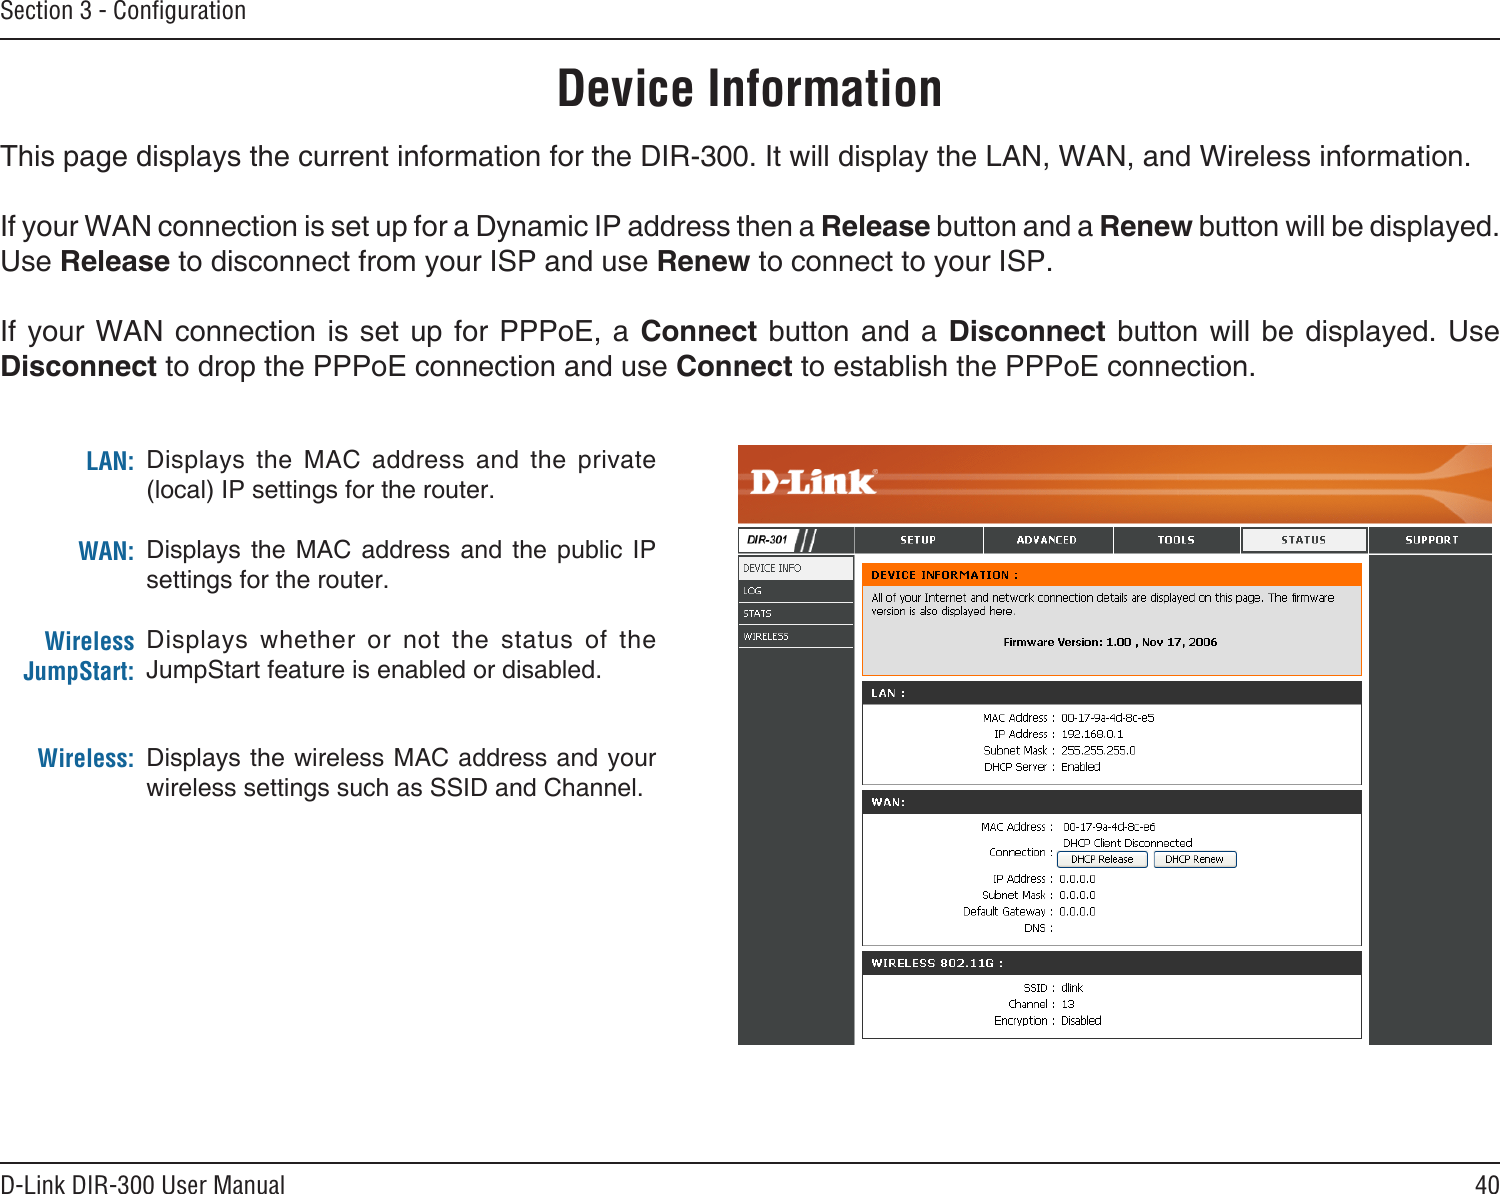 40D-Link DIR-300 User ManualSection 3 - ConﬁgurationDevice InformationThis page displays the current information for the DIR-300. It will display the LAN, WAN, and Wireless information.If your WAN connection is set up for a Dynamic IP address then a Release button and a Renew button will be displayed. Use Release to disconnect from your ISP and use Renew to connect to your ISP. If your  WAN connection is  set up for  PPPoE, a Connect  button and a  Disconnect button will  be displayed. Use Disconnect to drop the PPPoE connection and use Connect to establish the PPPoE connection.Displays  the  MAC  address  and  the  private (local) IP settings for the router.Displays  the  MAC  address  and  the  public  IP settings for the router.Displays  whether  or  not  the  status  of  the JumpStart feature is enabled or disabled.Displays the wireless MAC address and your wireless settings such as SSID and Channel.LAN:WAN:Wireless JumpStart:Wireless: